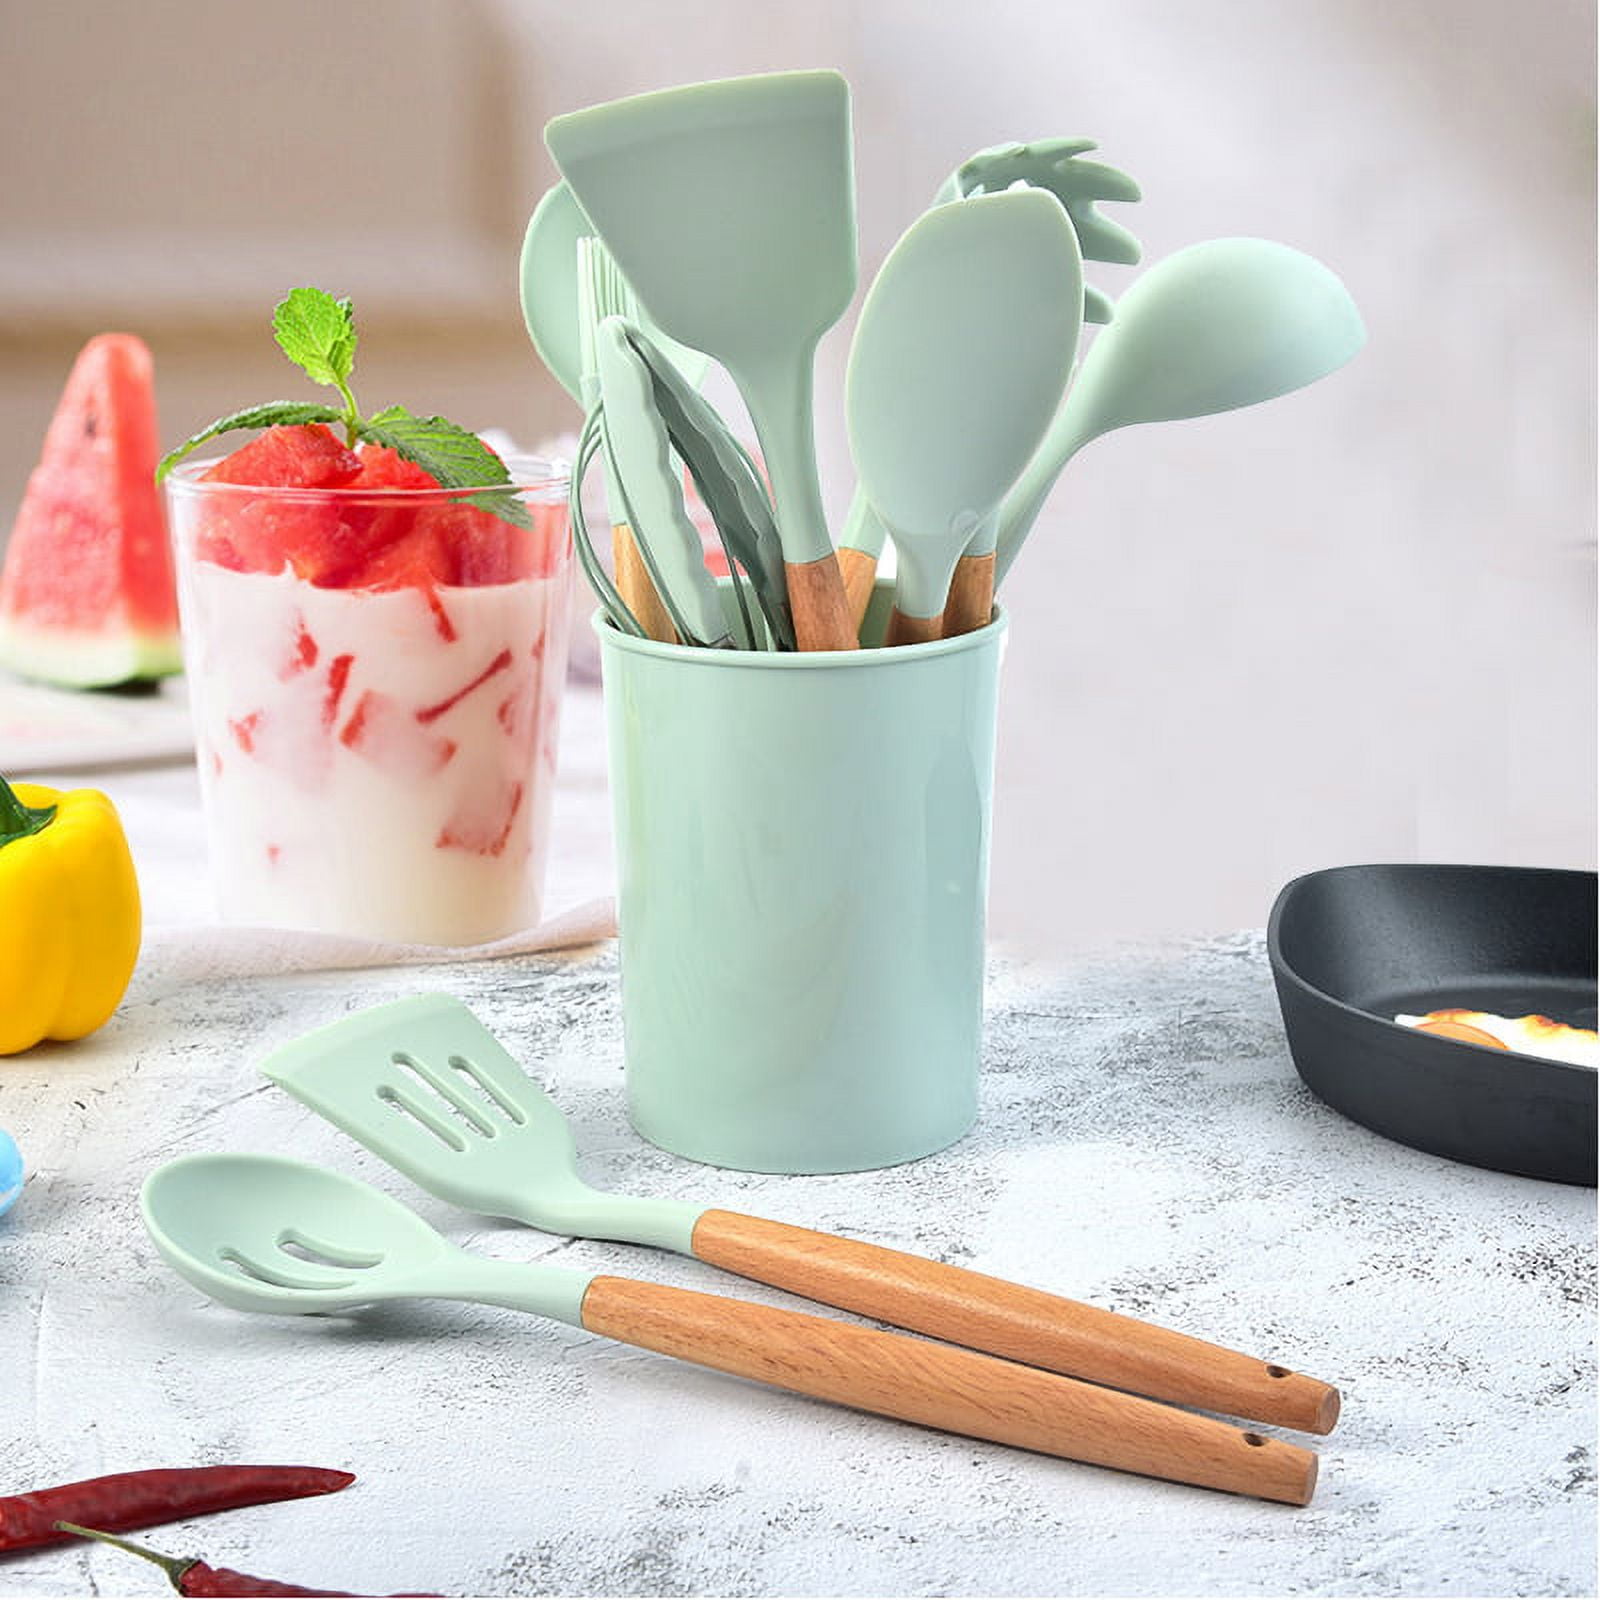 Rush Silicone kitchen cookware set, 12PCS kitchen utensil spatula set with  stainless steel non-stick cookware holder, BPA-free non-toxic cookware,  kitchen tool gift (mint green) ST-001 S5669 